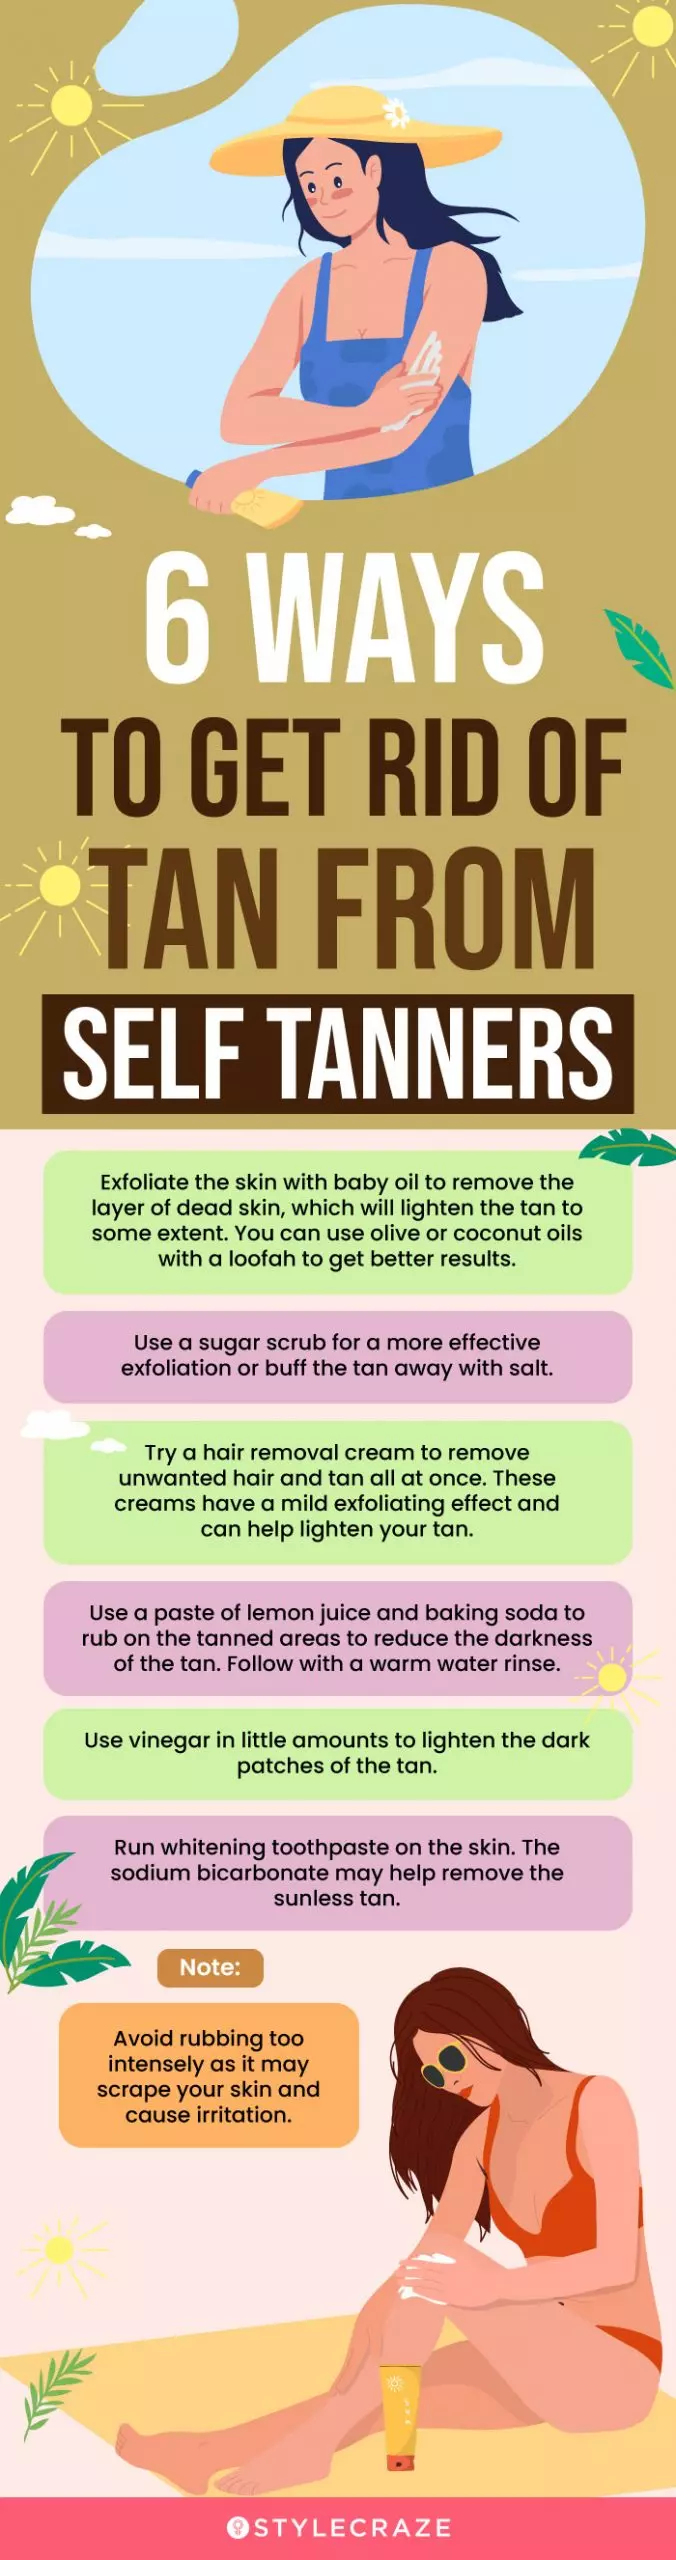 Ways To Get Rid Of Tan From Self Tanners (infographic)